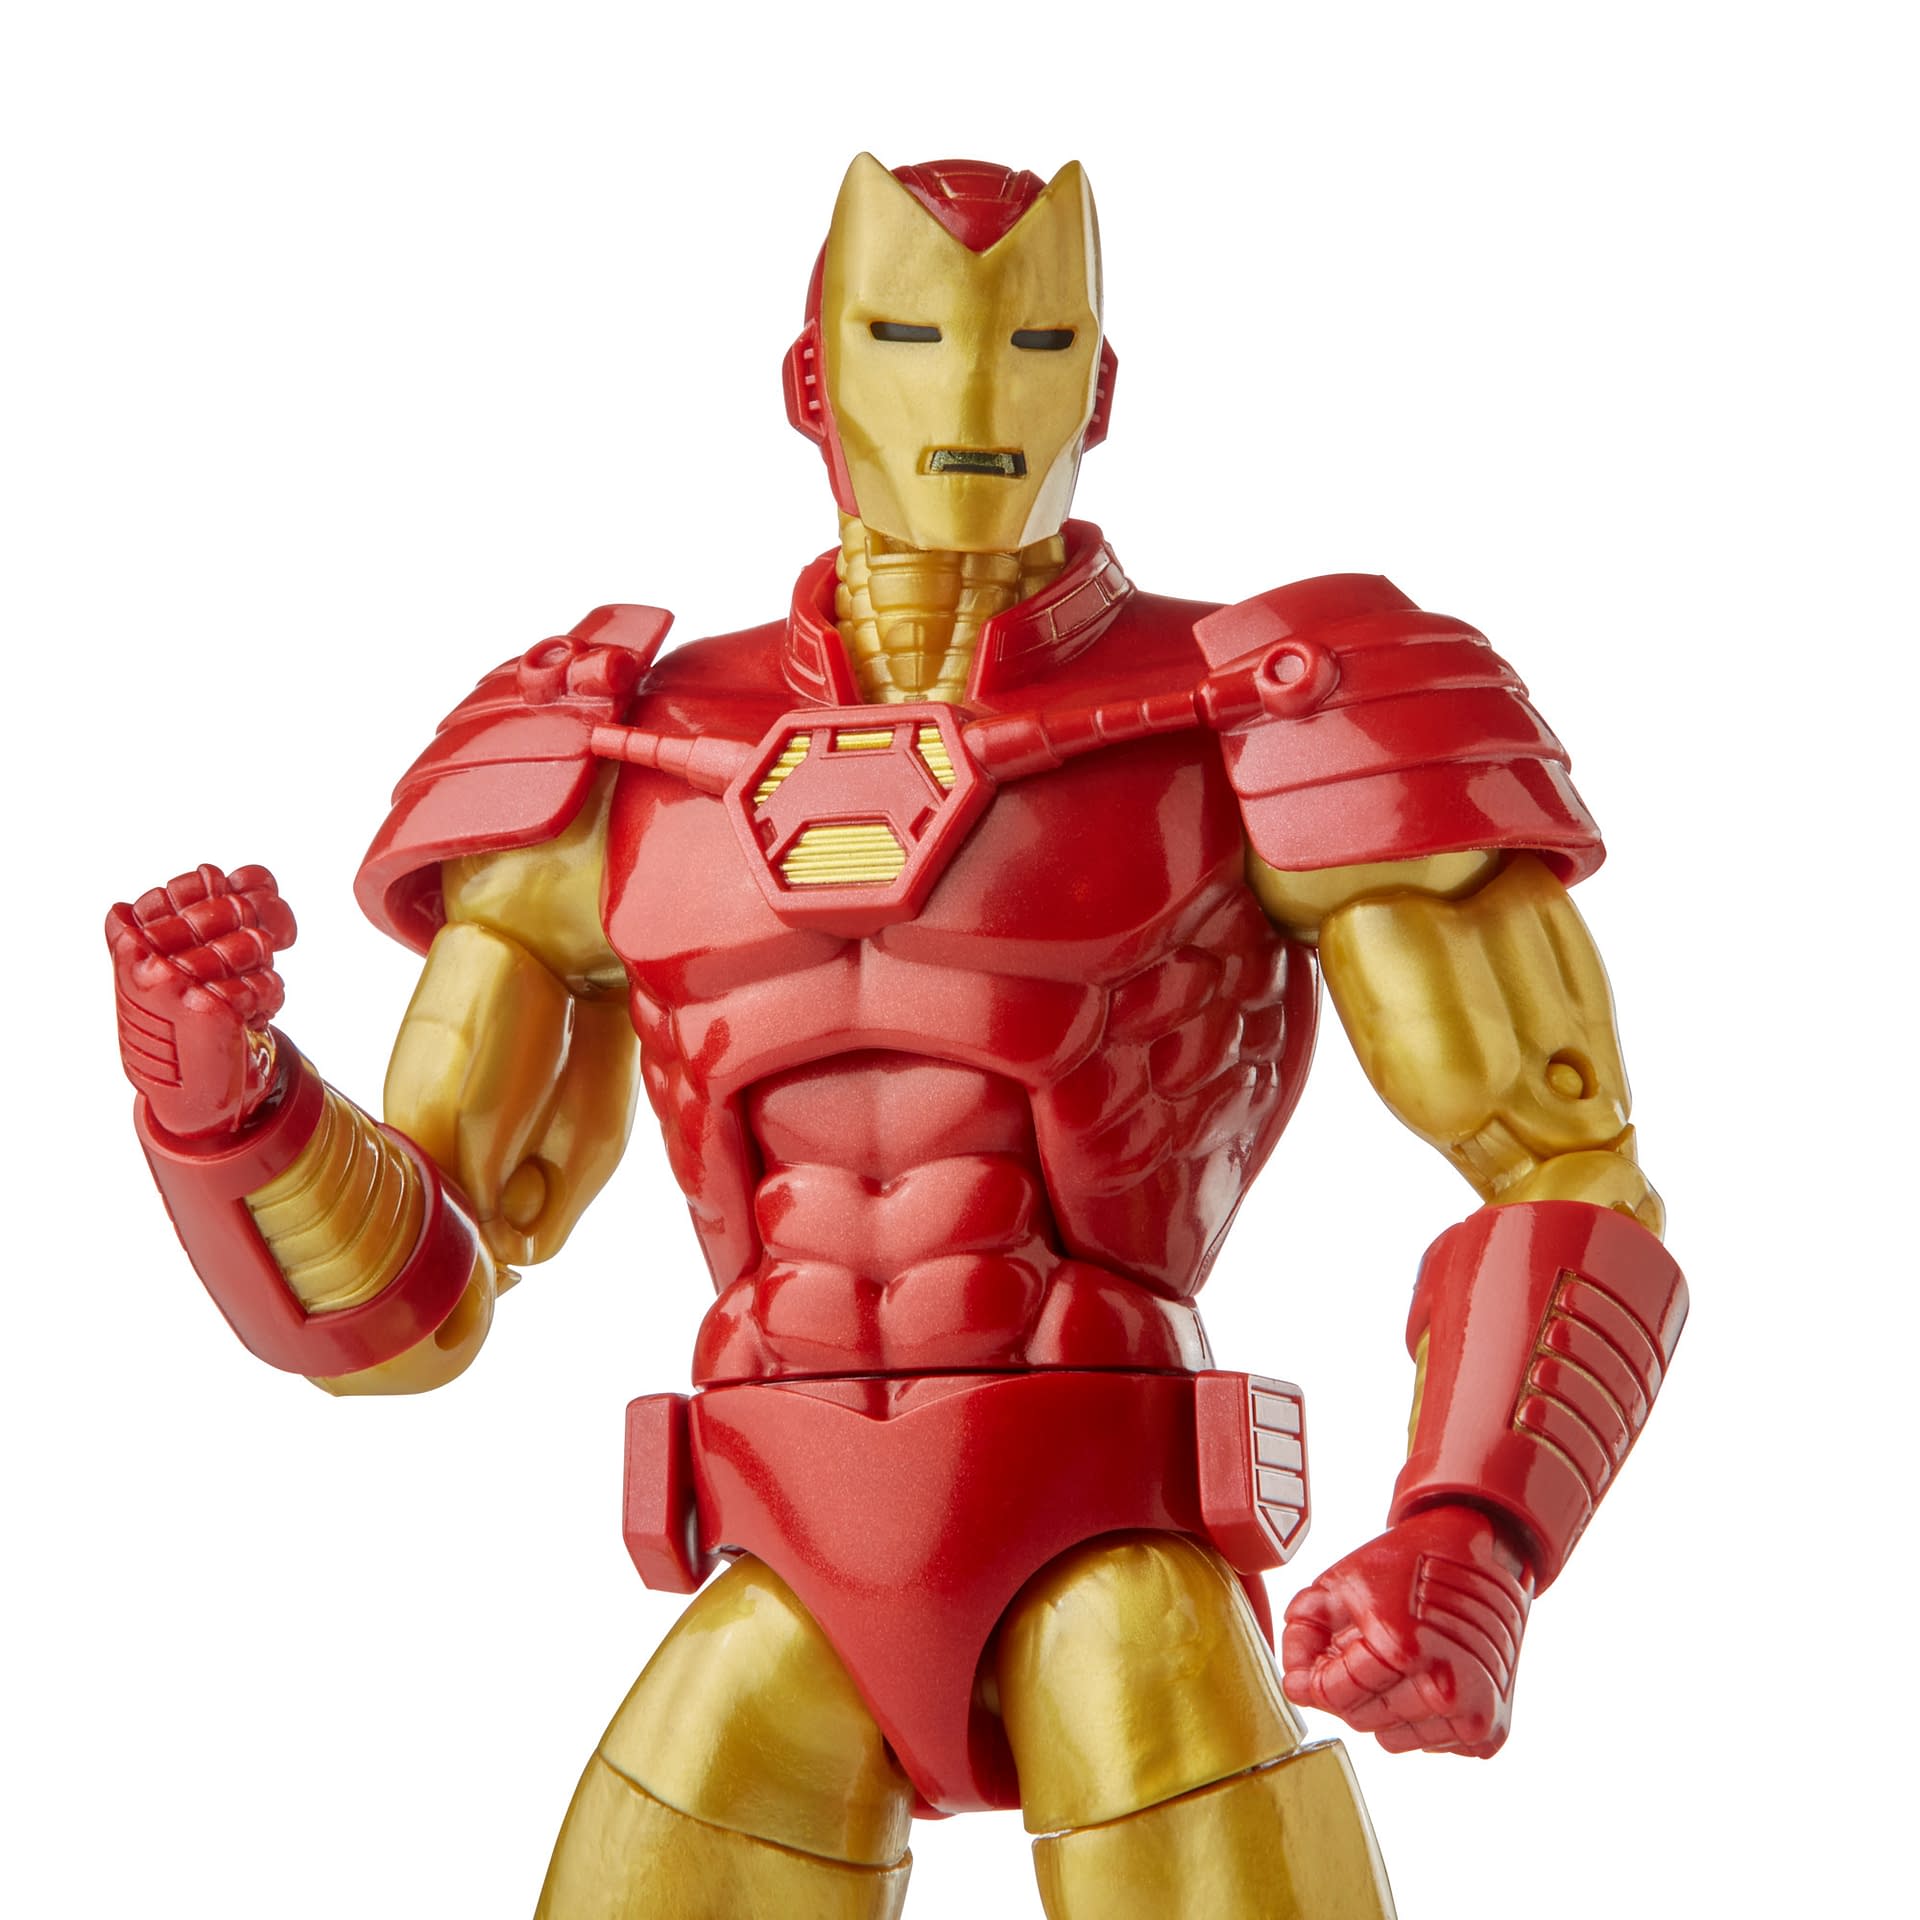 Hasbro Unveils New The Marvels Legends Wave with Captain Marvel 